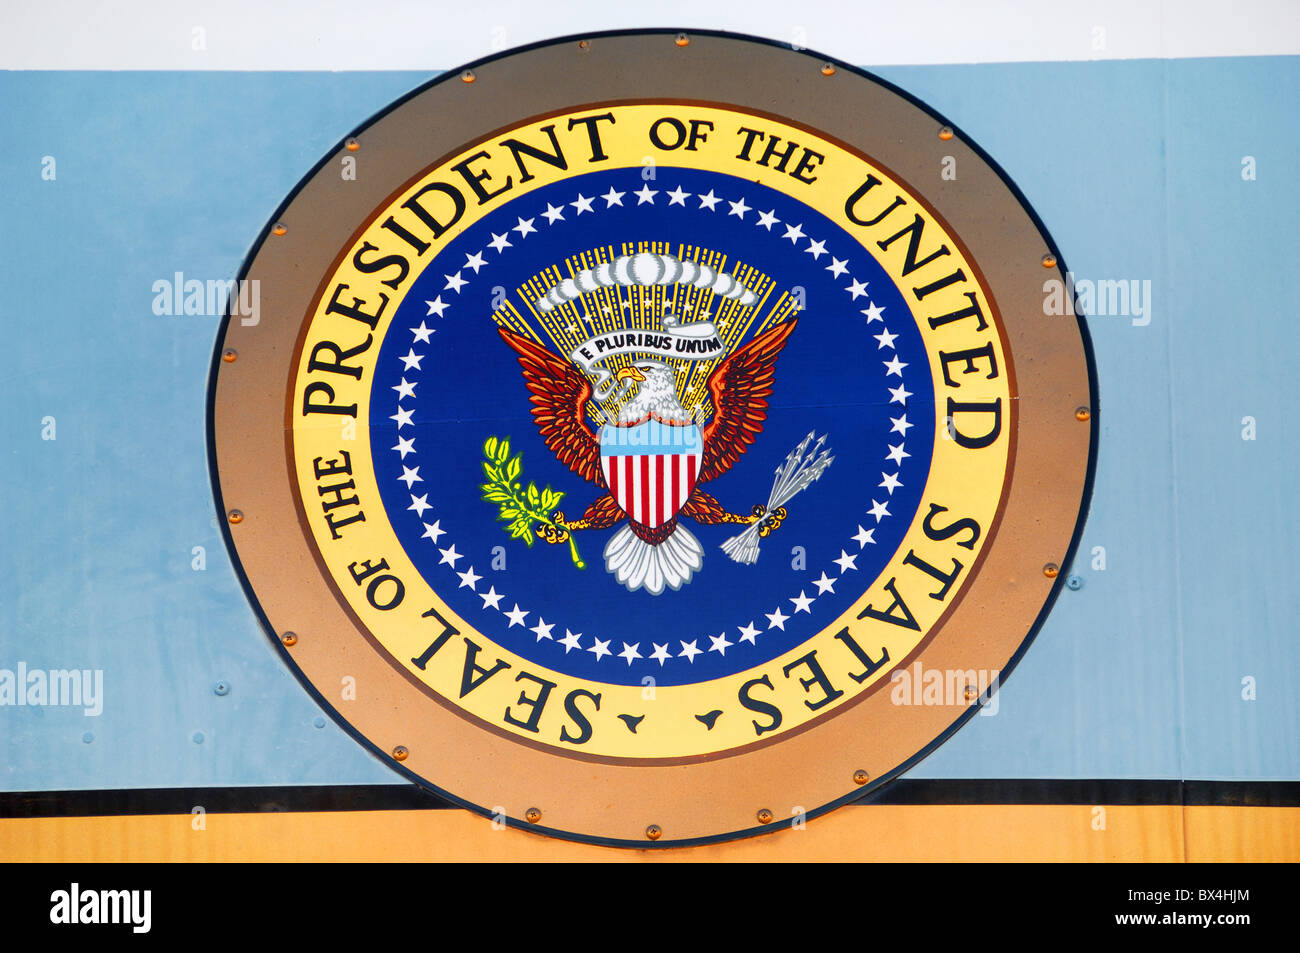 Presidential Seal on Air Force One by Presidents Kennedy and Johnson. It is at Pima Air and Space Museum, Tucson, Arizona Stock Photo